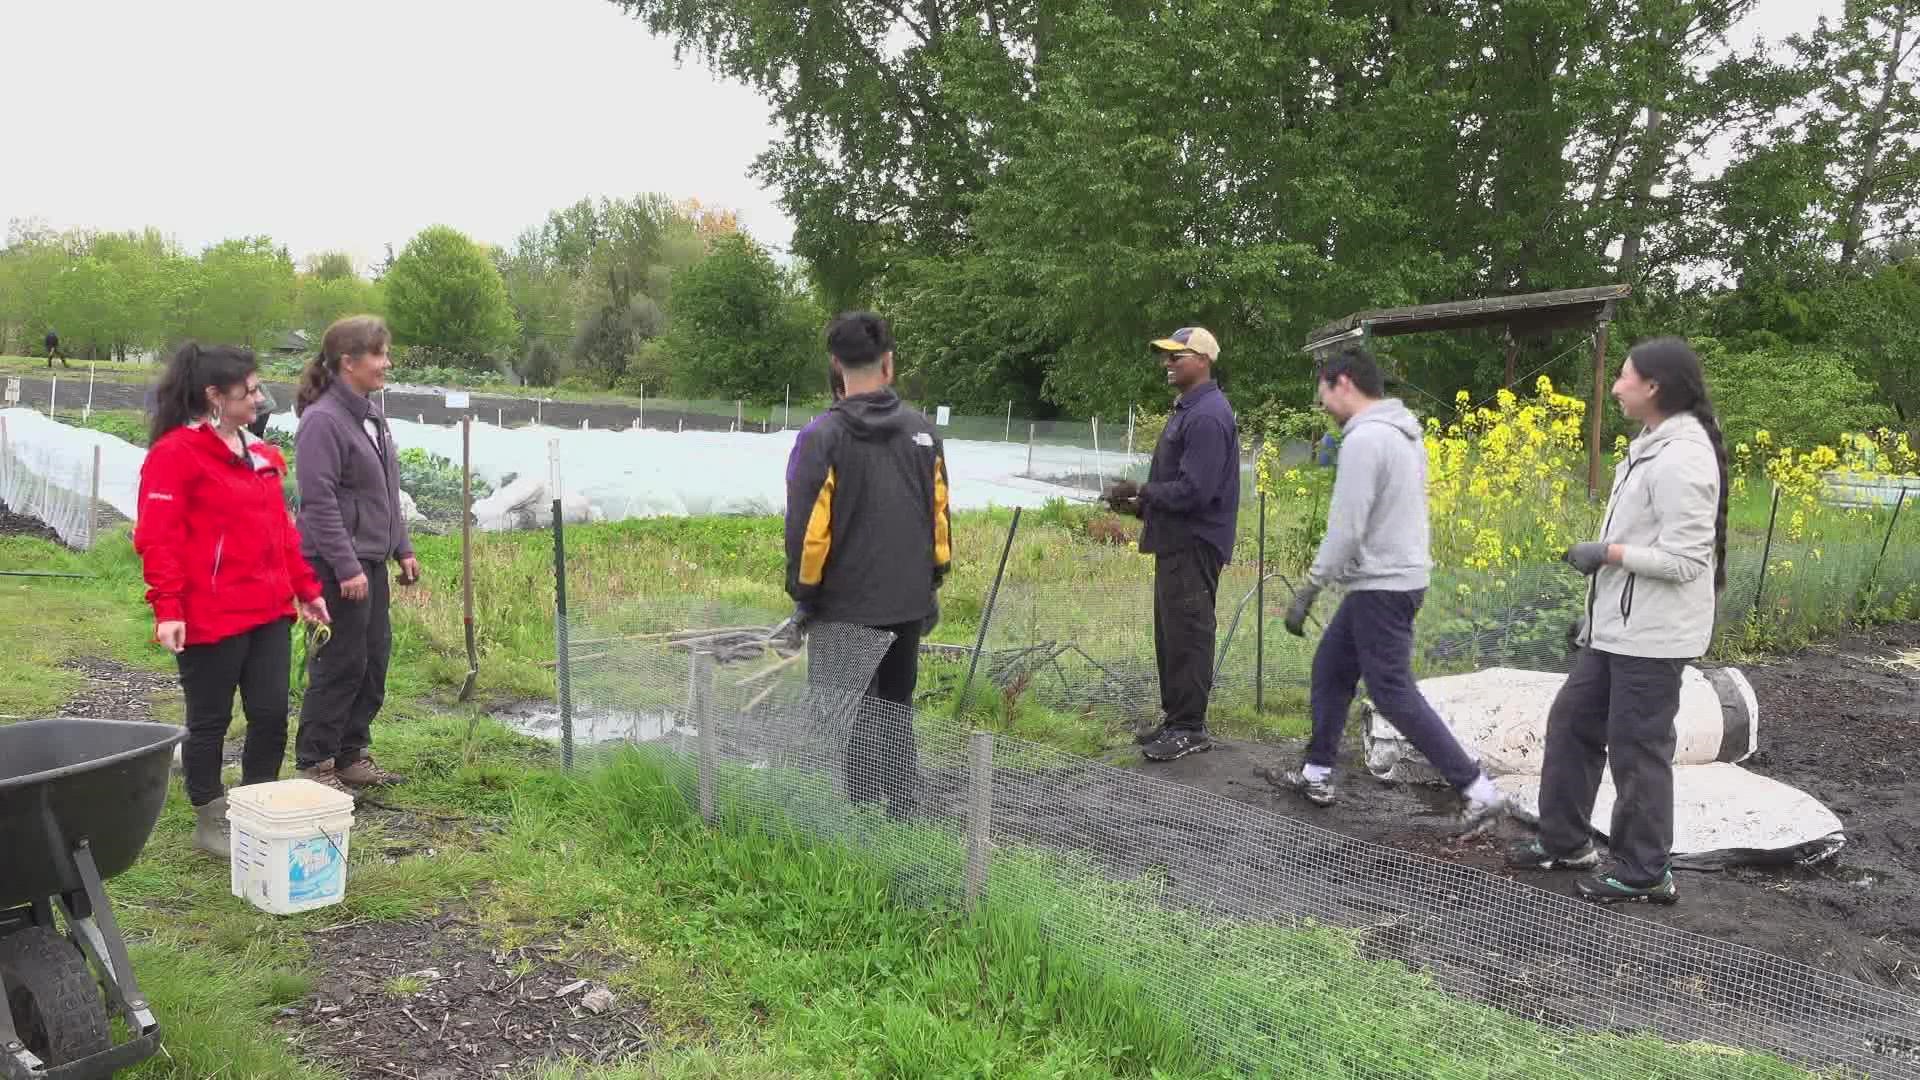 The UW Native Garden is a place for indigenous students to share their culture and community to learn about combining tradition with modern techniques.